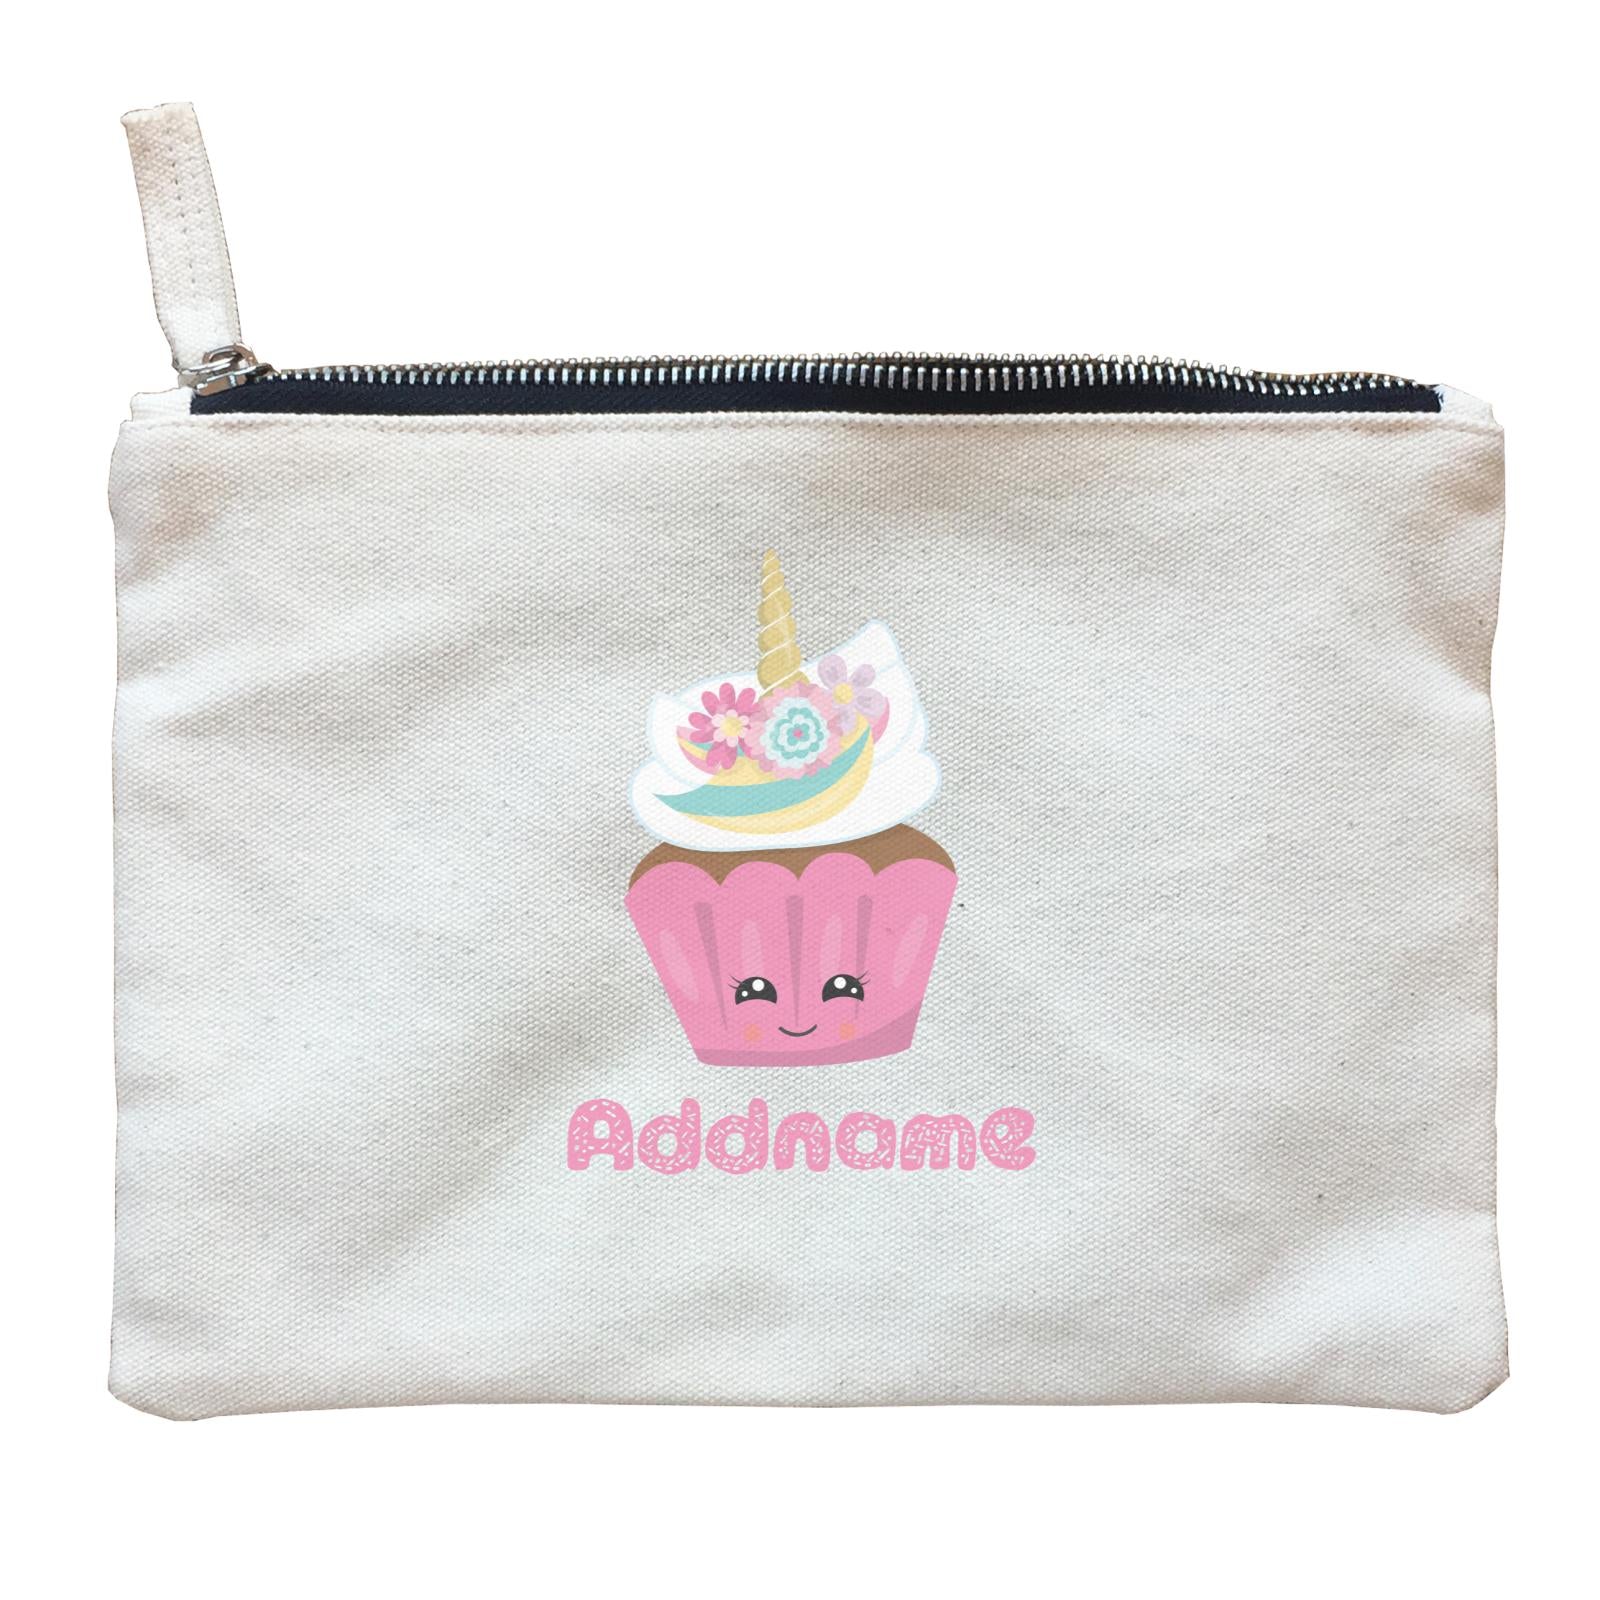 Magical Sweets Pink Cupcake Addname Zipper Pouch